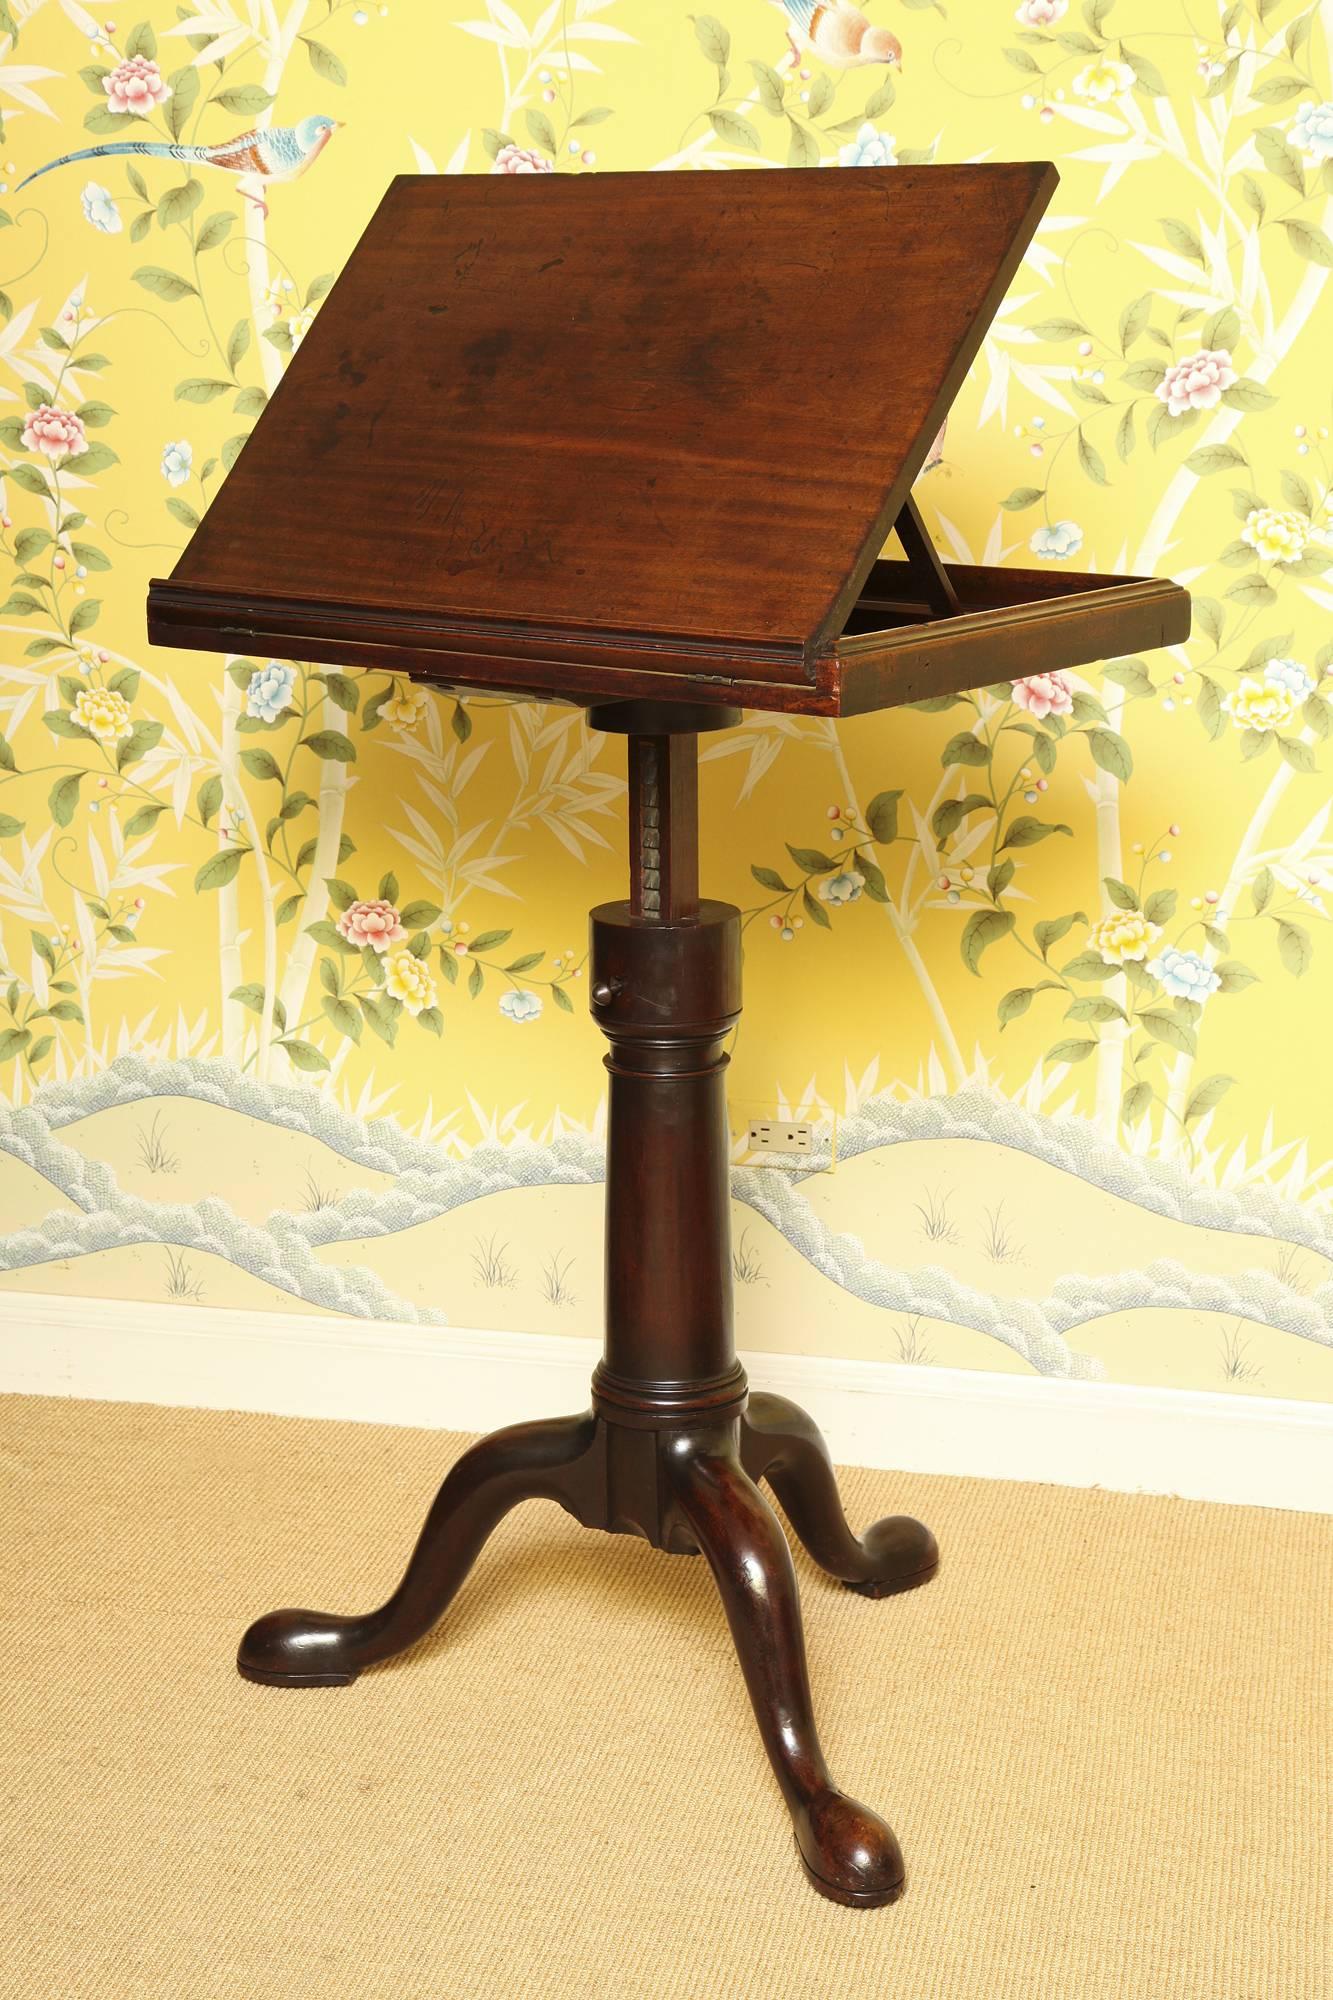 Rare George II Solid Mahogany Dictionary Stand, having a hinged racheted top platform on an adjustable riser, and supported on a turned turret baluster above a tripod base with heavy cabriole legs ending in rounded pad feet and brass castors,